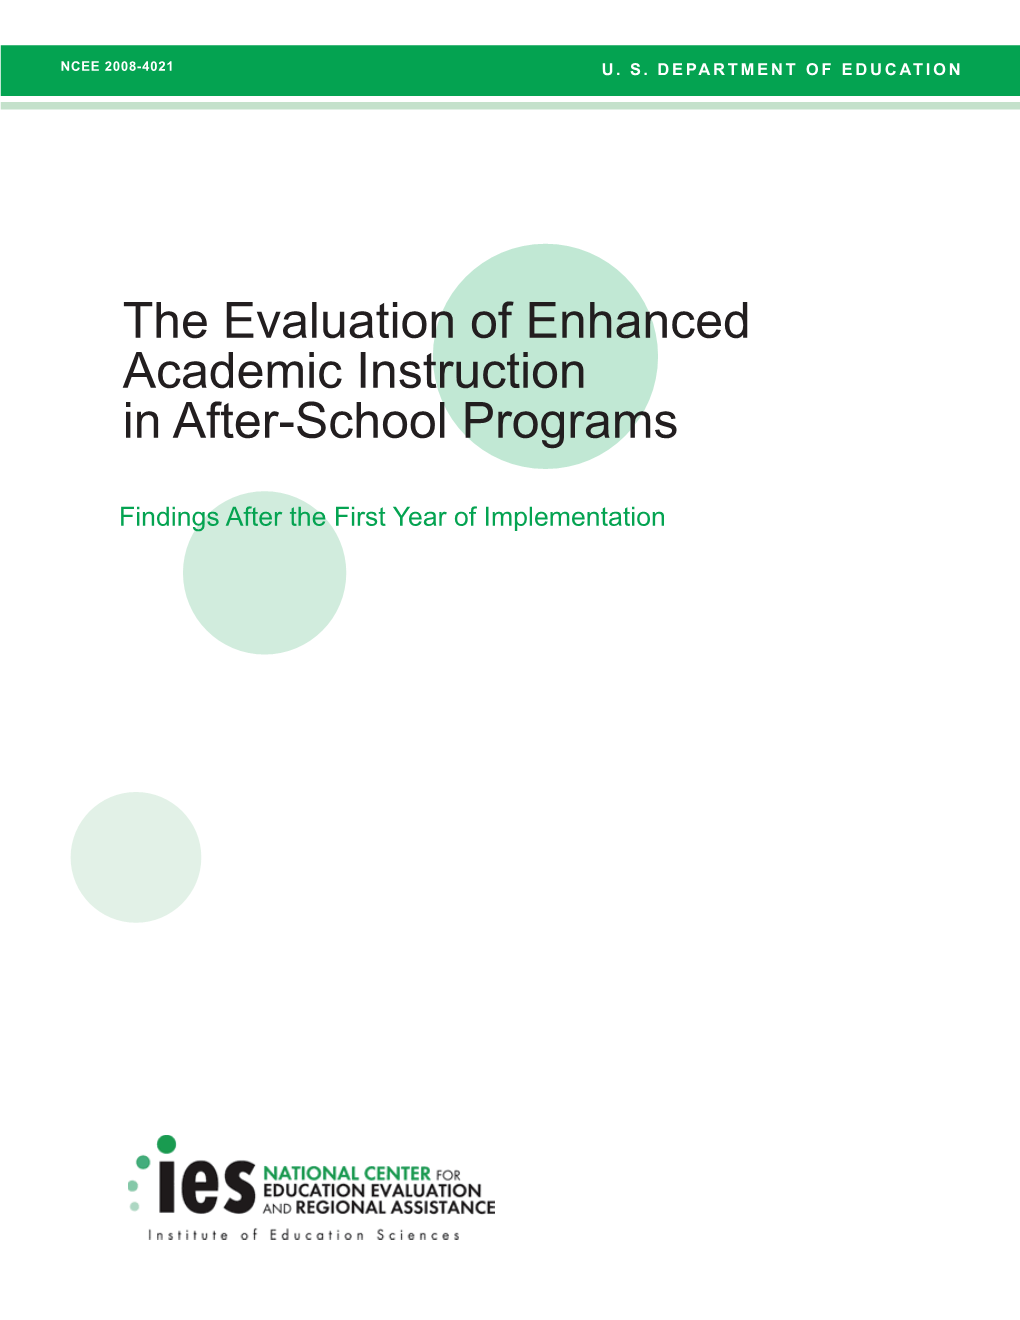 The Evaluation of Enhanced Academic Instruction in After-School Programs